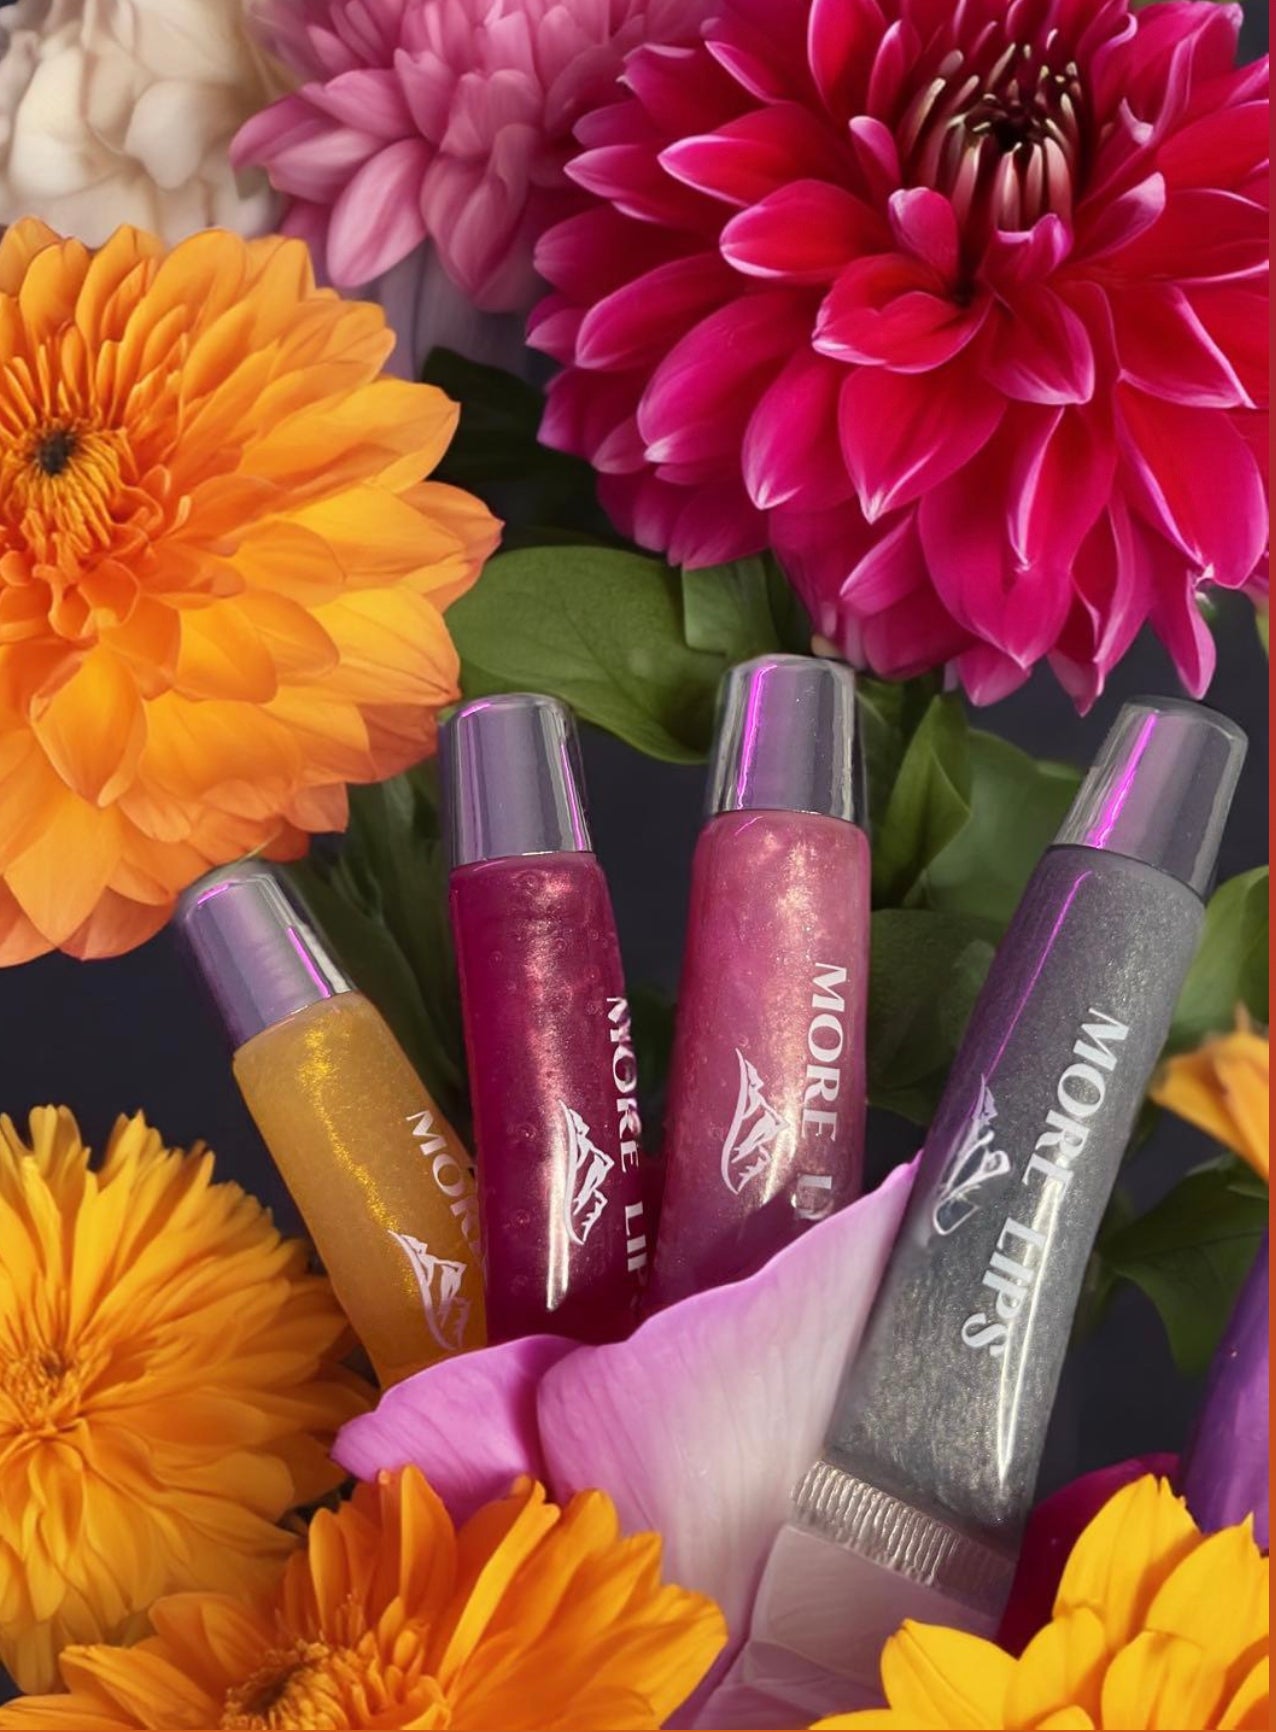 Image of More Lips Vegan Lip Gloss in various shades, showcasing vibrant colors and luscious shine